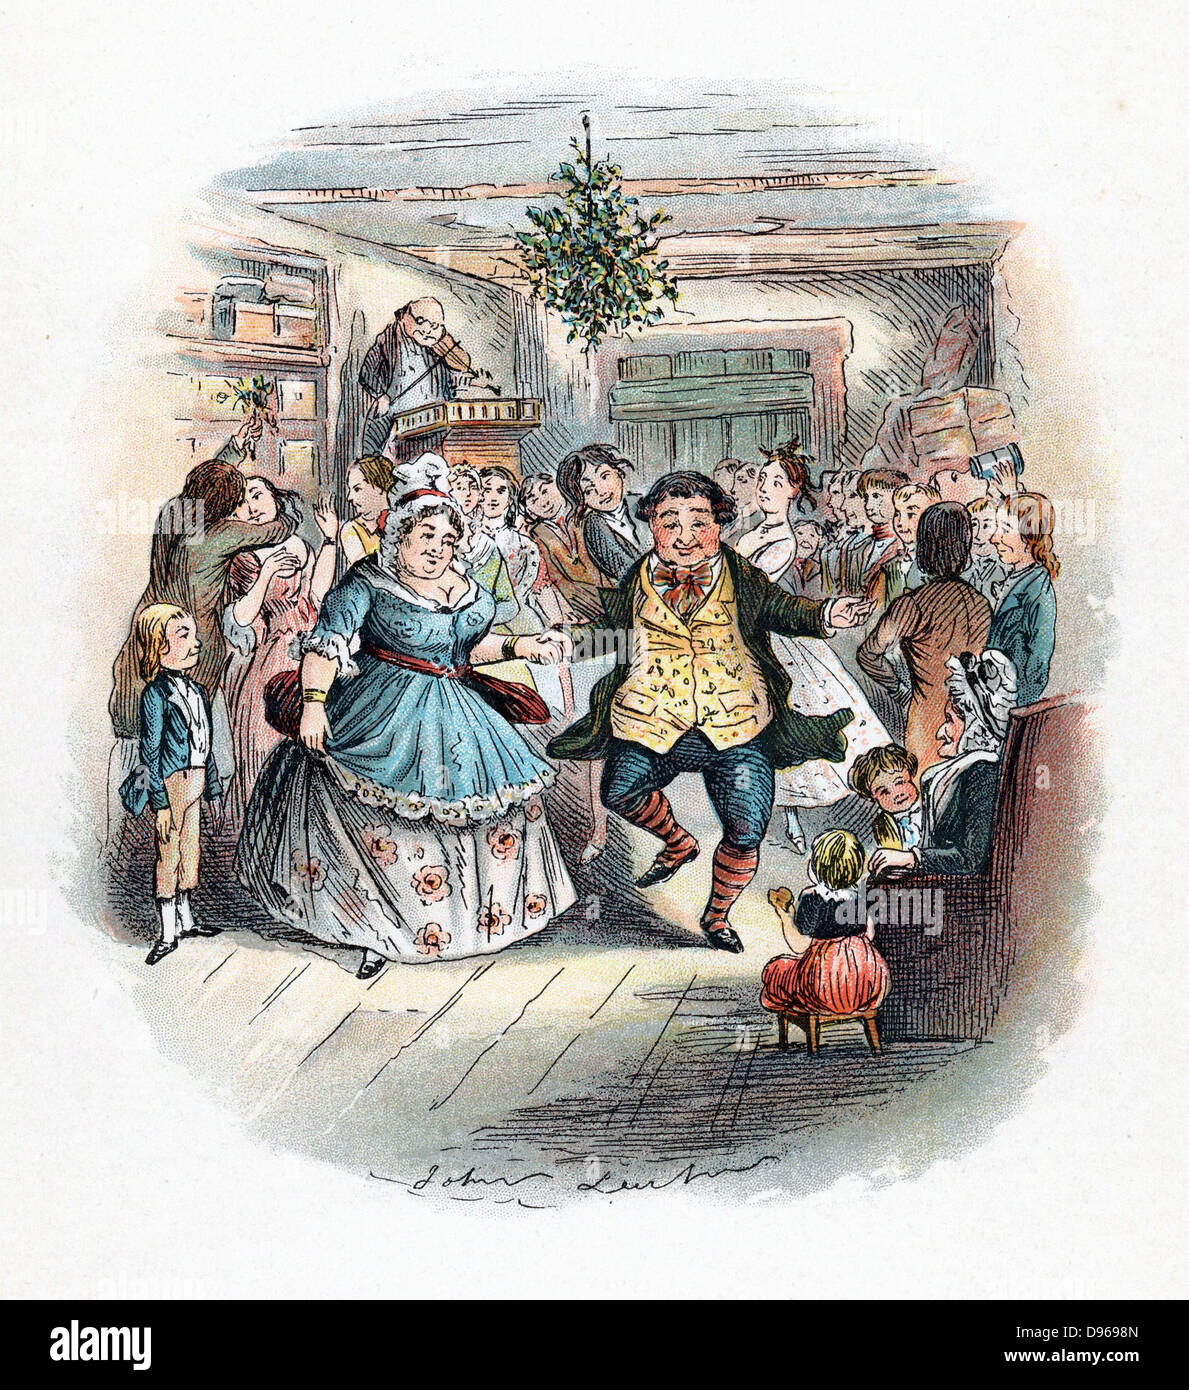 Mr Fezziwig's Ball, illustration by John Leech for  'A Christmas Carol' by Charles Dickens( London,1843). This novella was the earliest and most popular of Dickens' Christmas stories. Scene from the end of the book shows jollity and bonhomie, with fiddler (violinist) playing for dancers. Kissing under mistletoe, left,  and evergreen decoration hanging from ceiling are vestiges of pre-Christian winter rites. Stock Photo